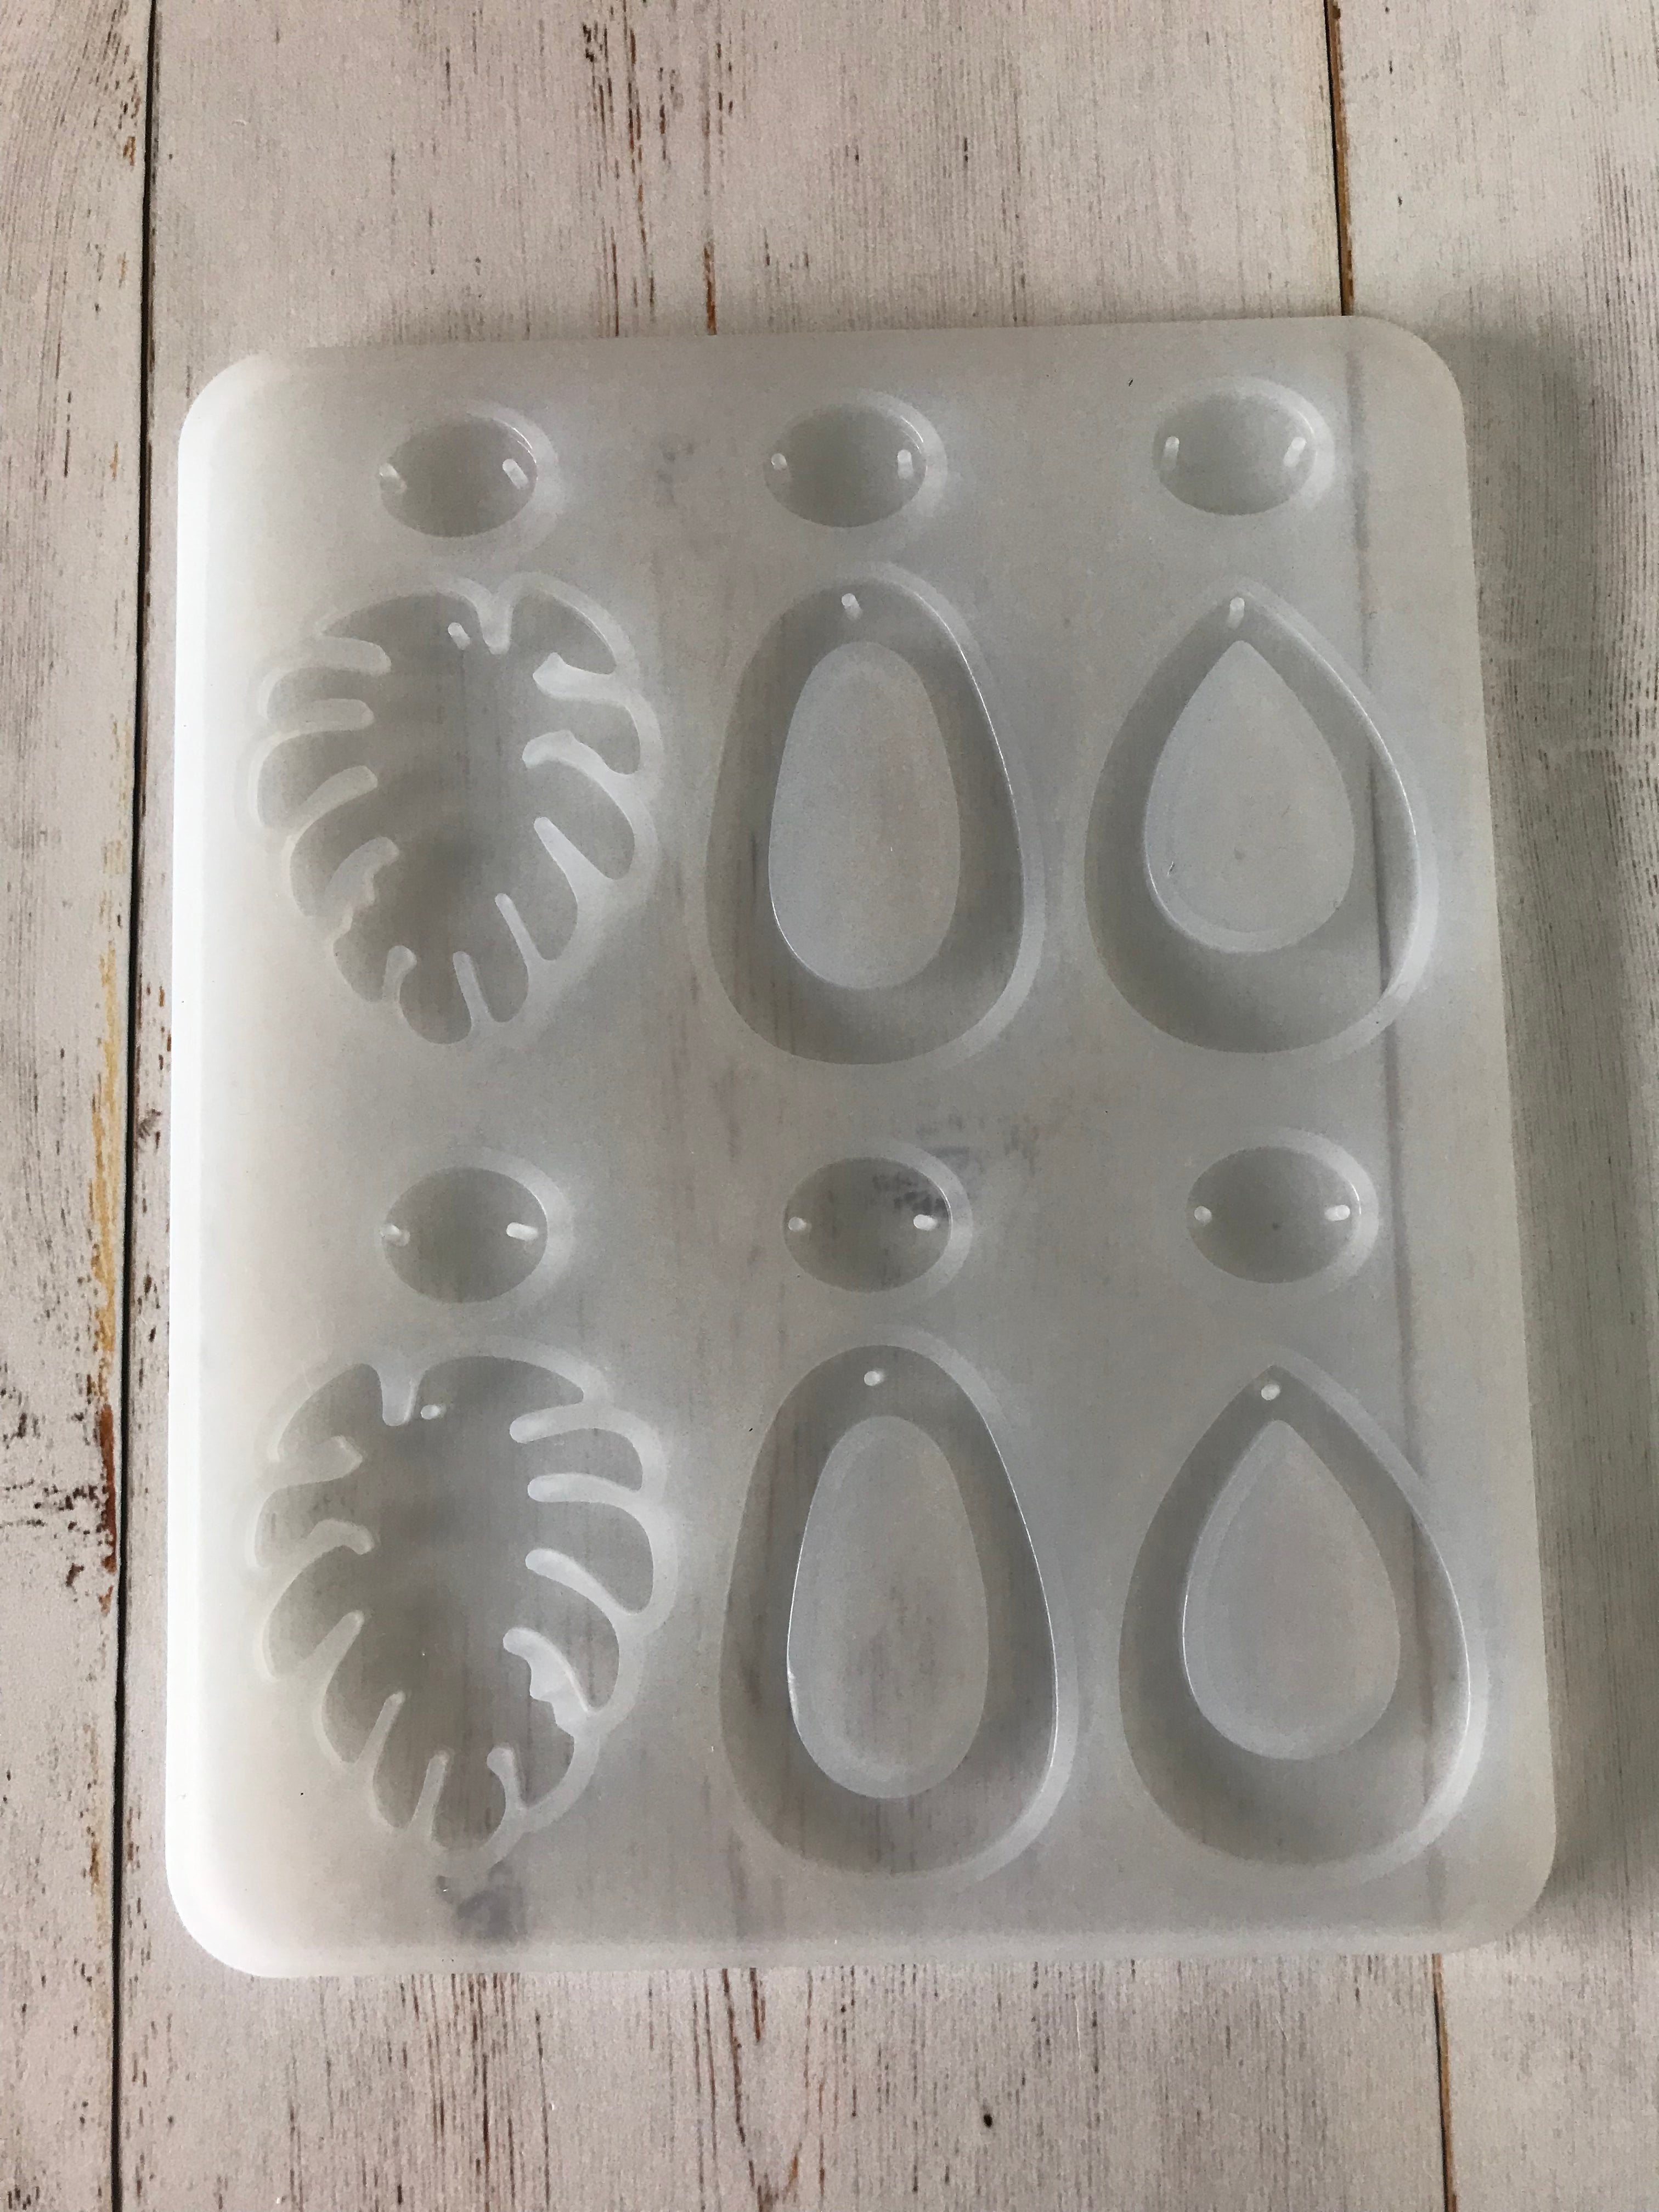 C008 - Earring Mould (to make 3 pairs)